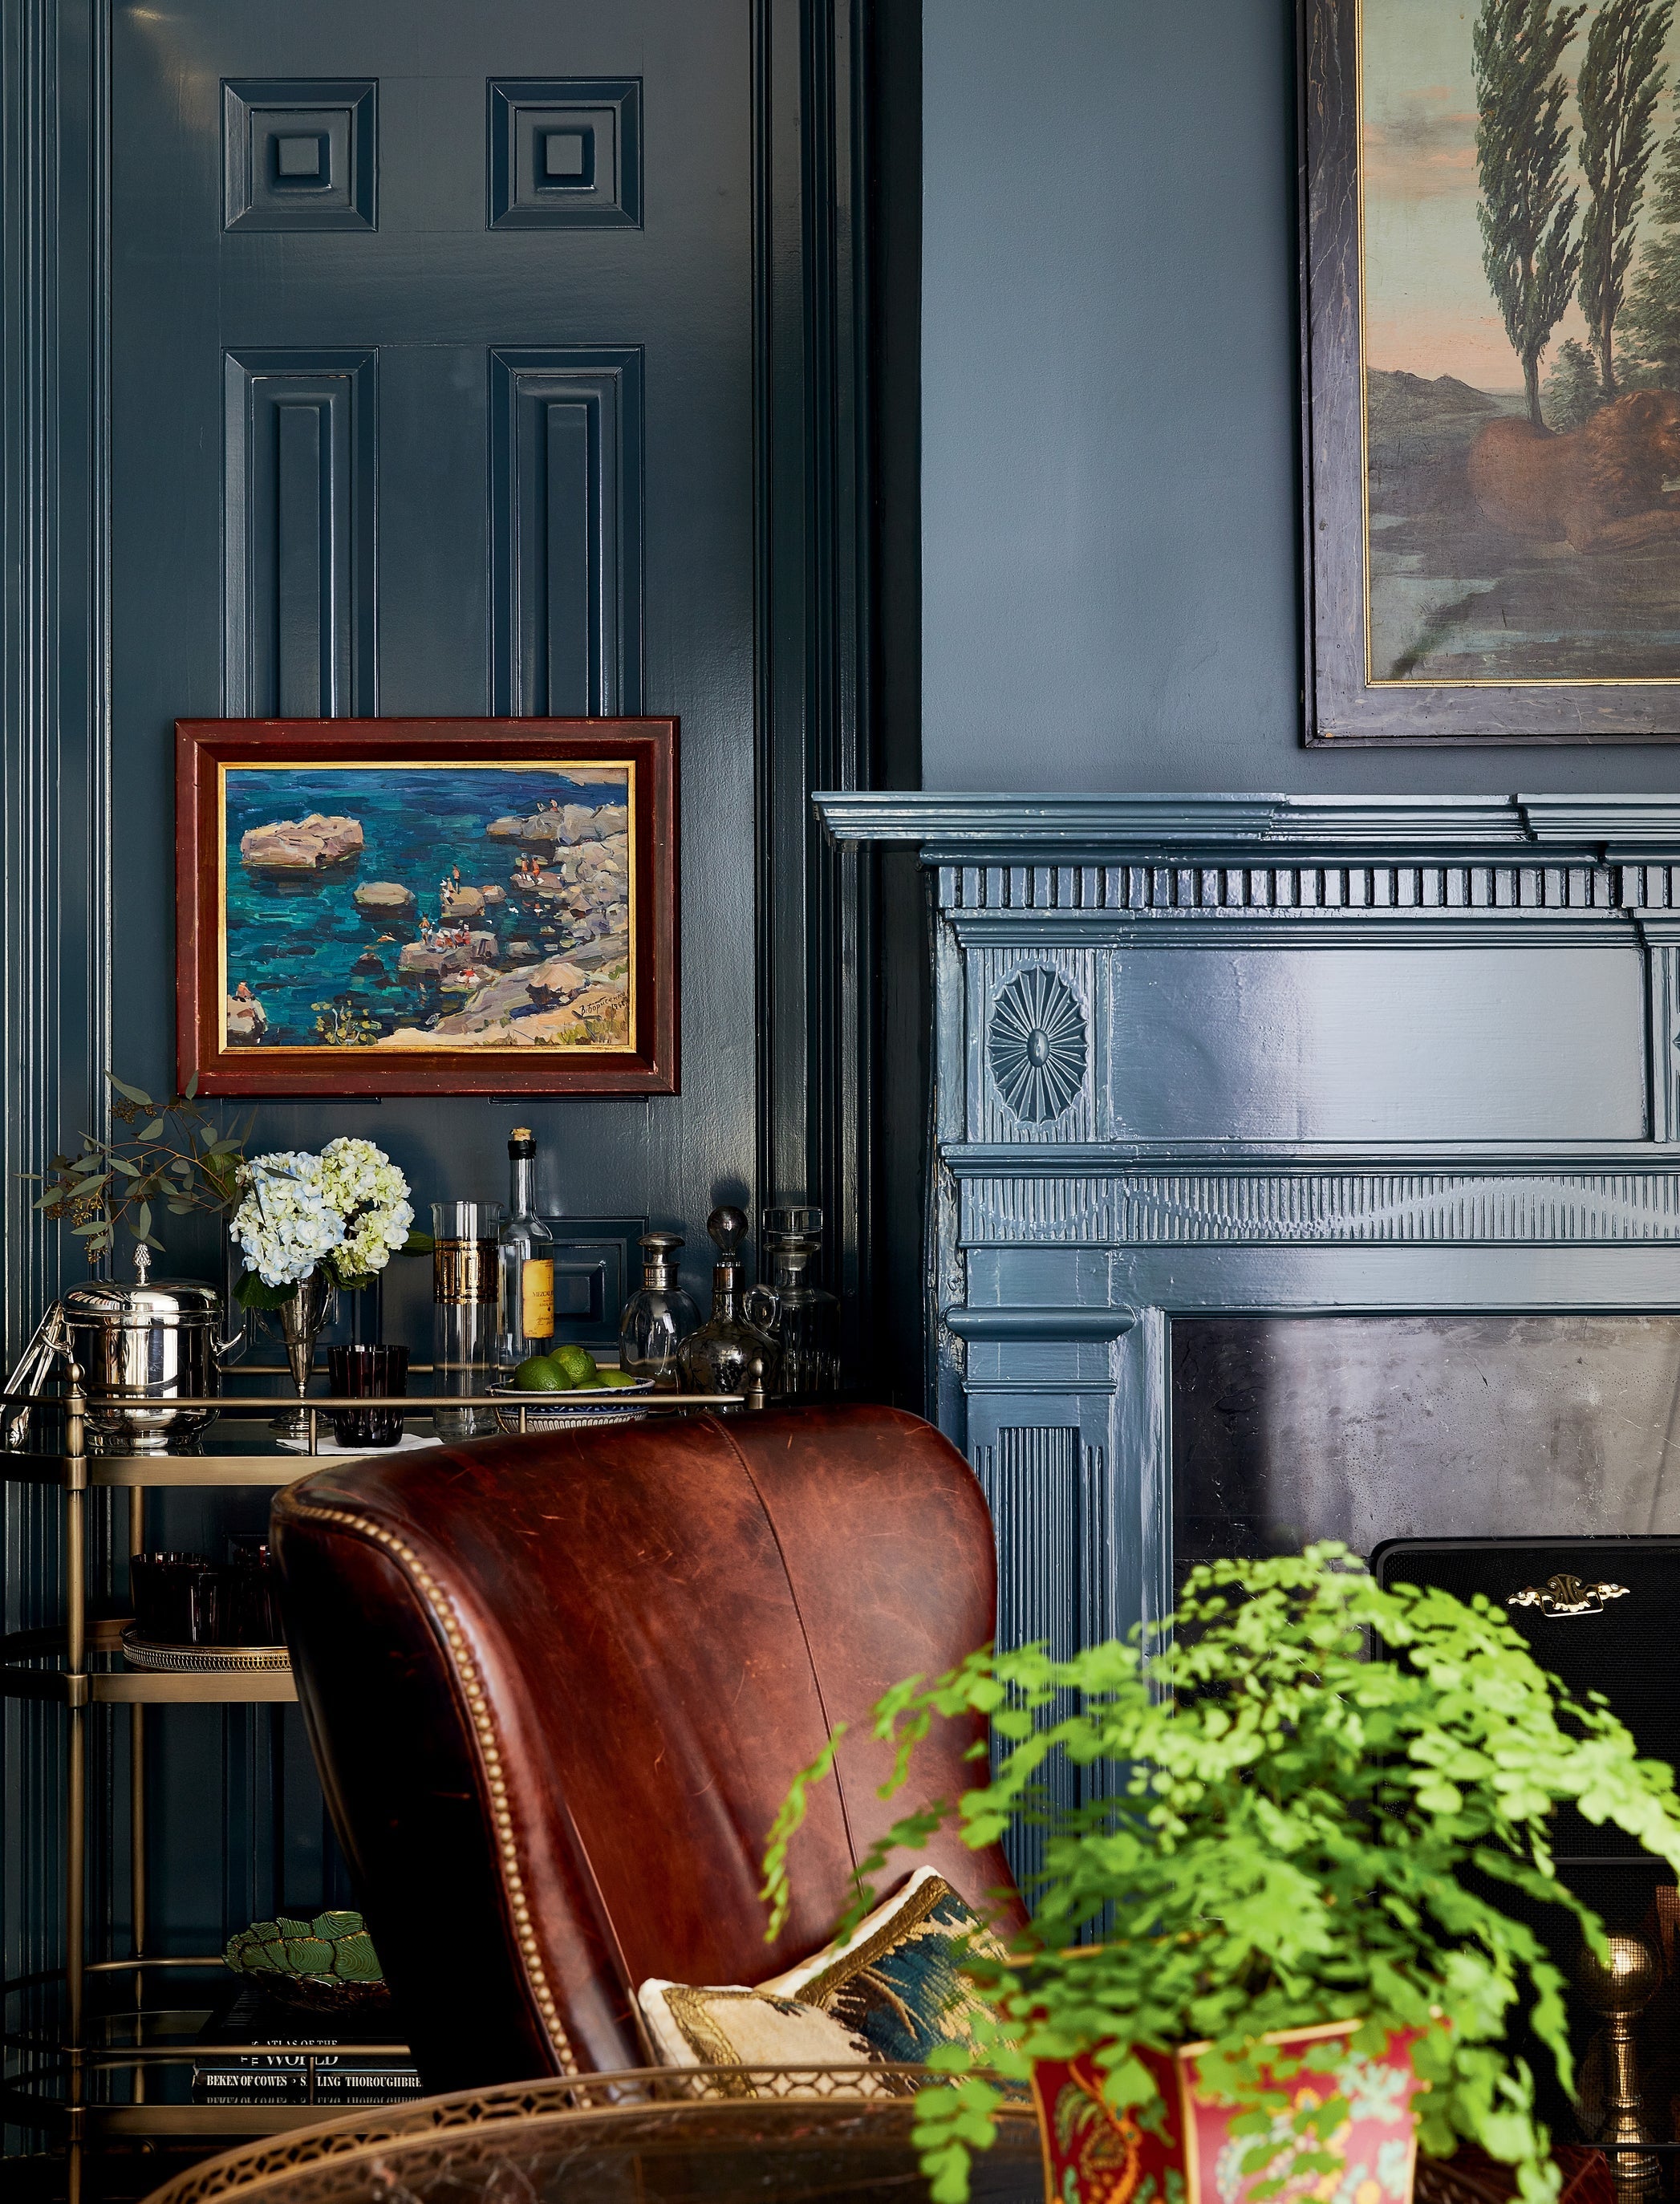 Elegant vintage-inspired home corner with a leather armchair, fireplace, and decorative touches against a blue-gray panelled wall.